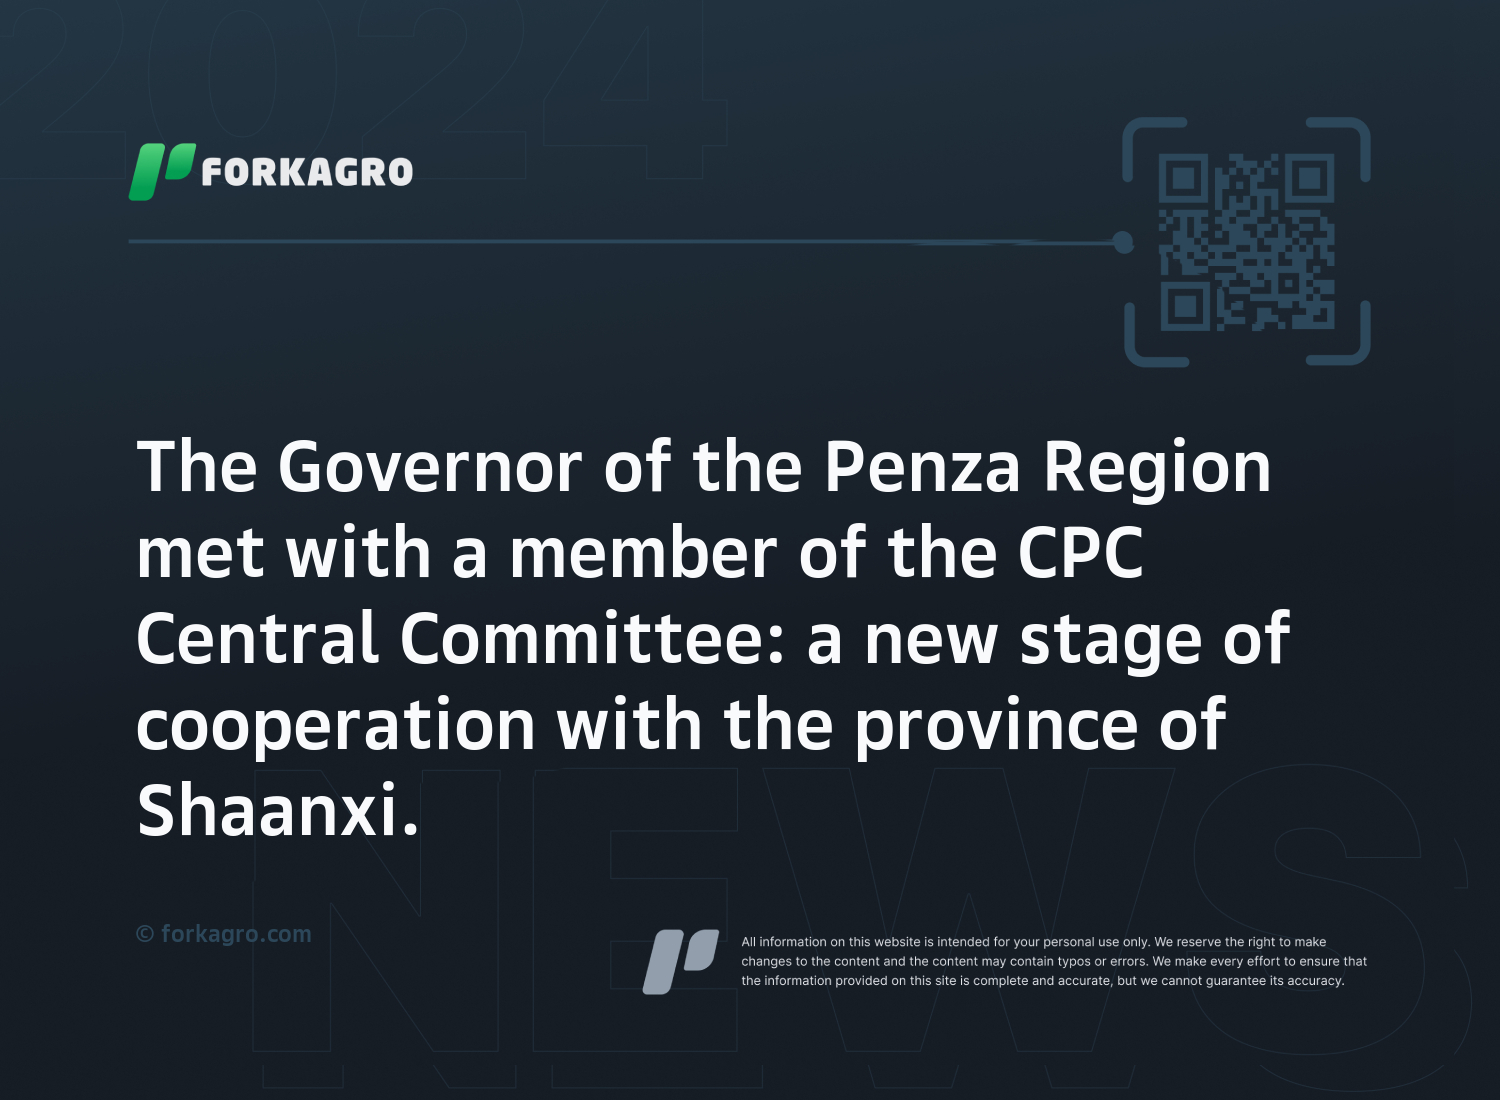 The Governor of the Penza Region met with a member of the CPC Central Committee: a new stage of cooperation with the province of Shaanxi.